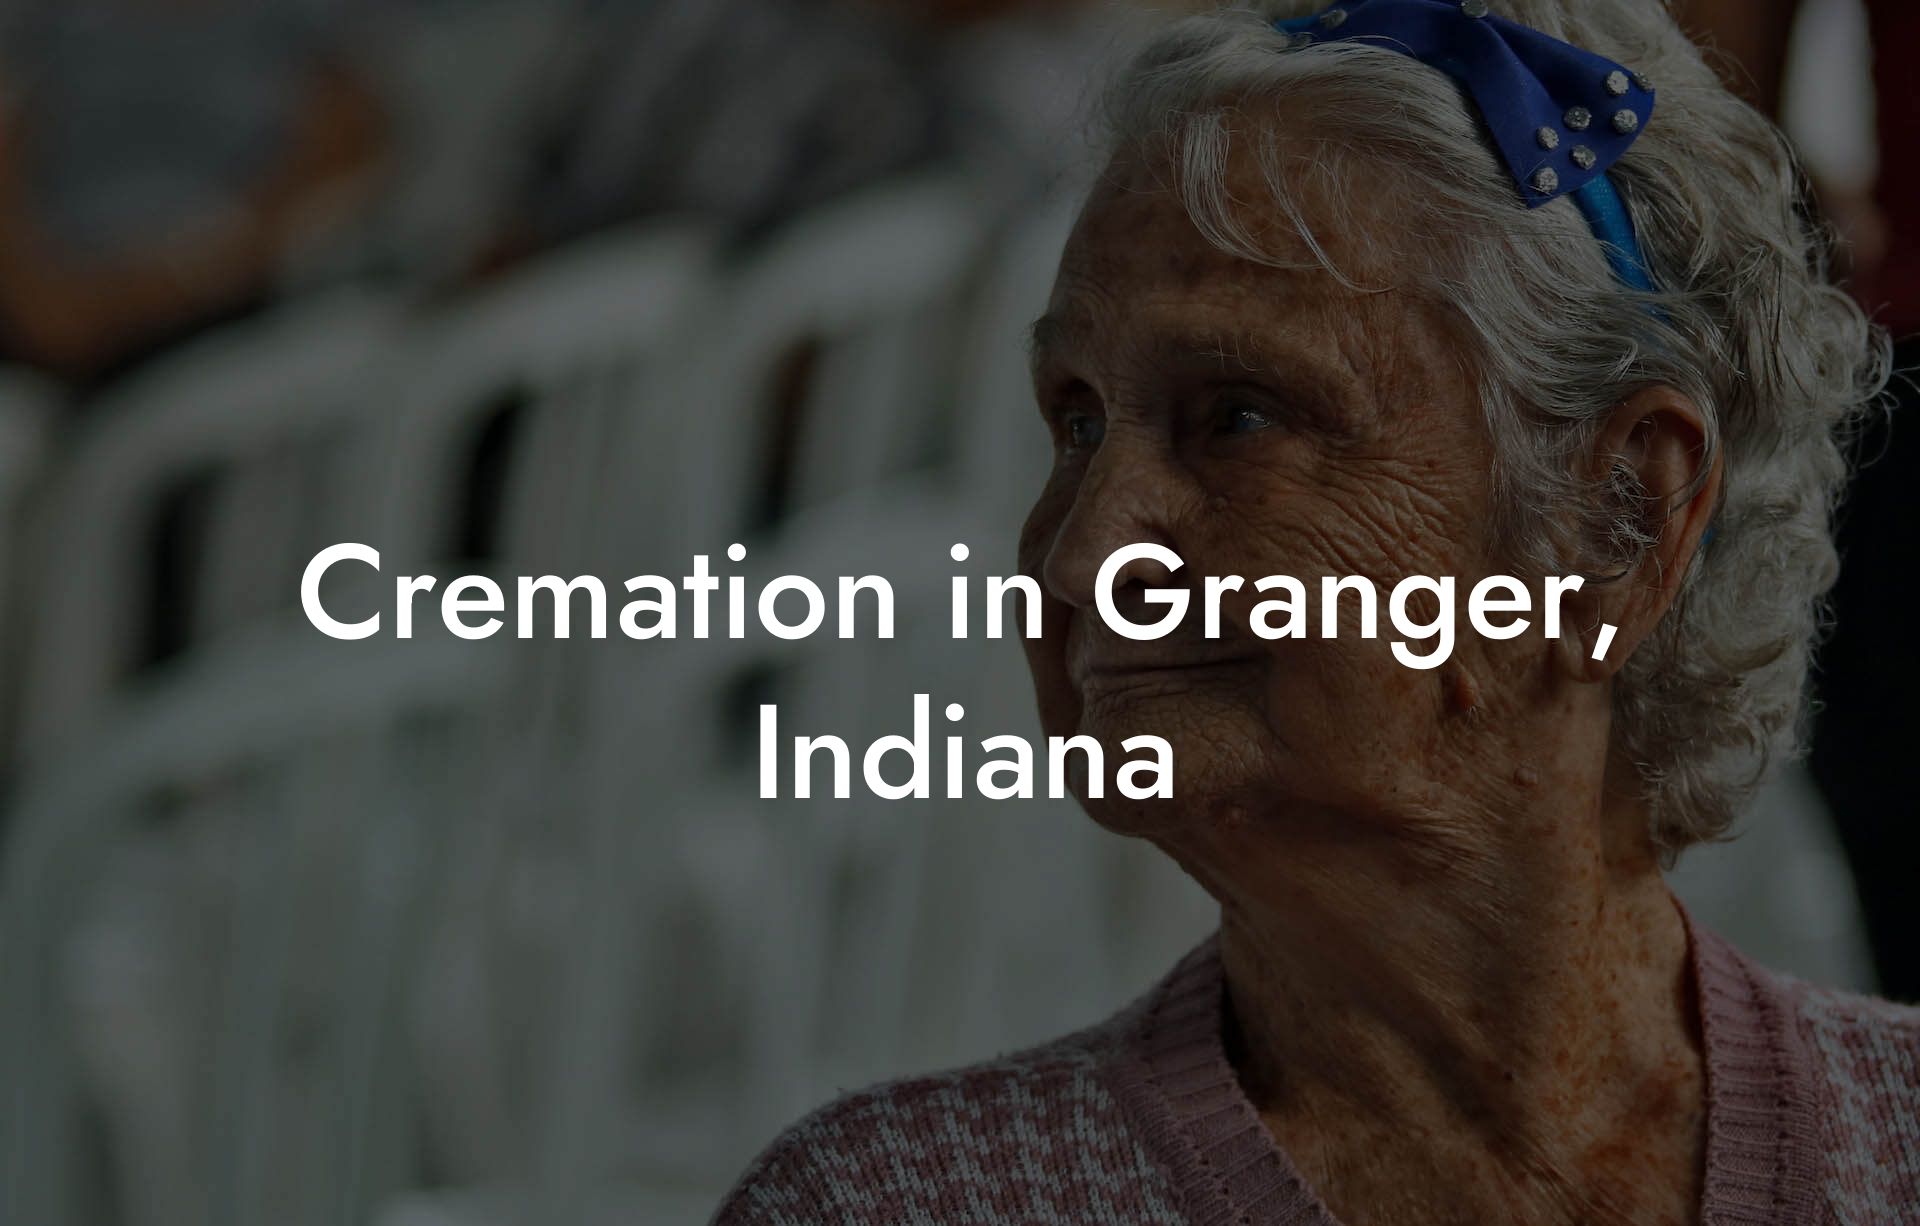 Cremation in Granger, Indiana